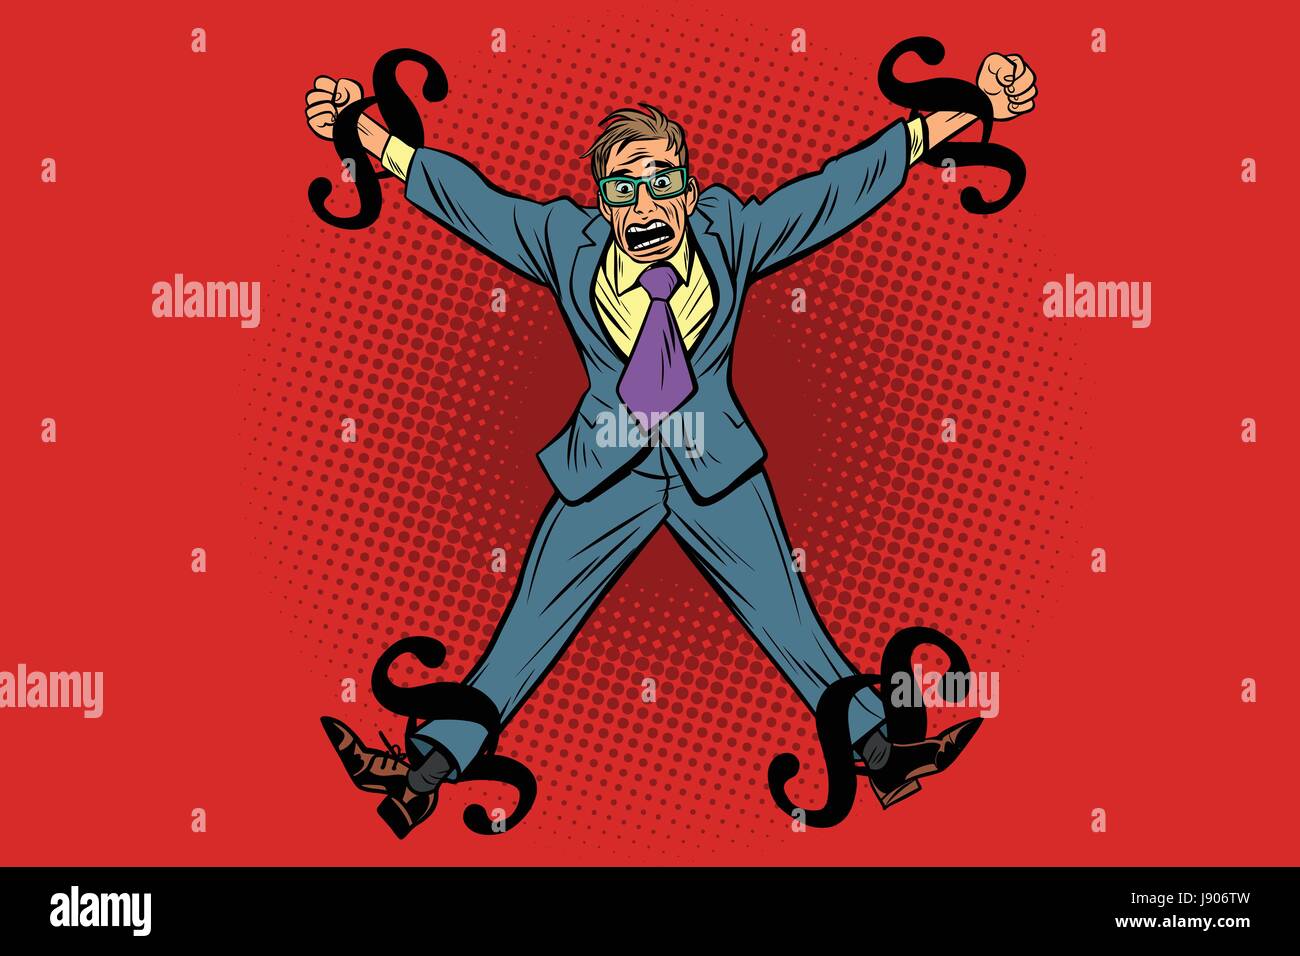 Businessman chained in legal rules, paragraphs as chain. Cartoon comic illustration pop art retro style vector Stock Vector